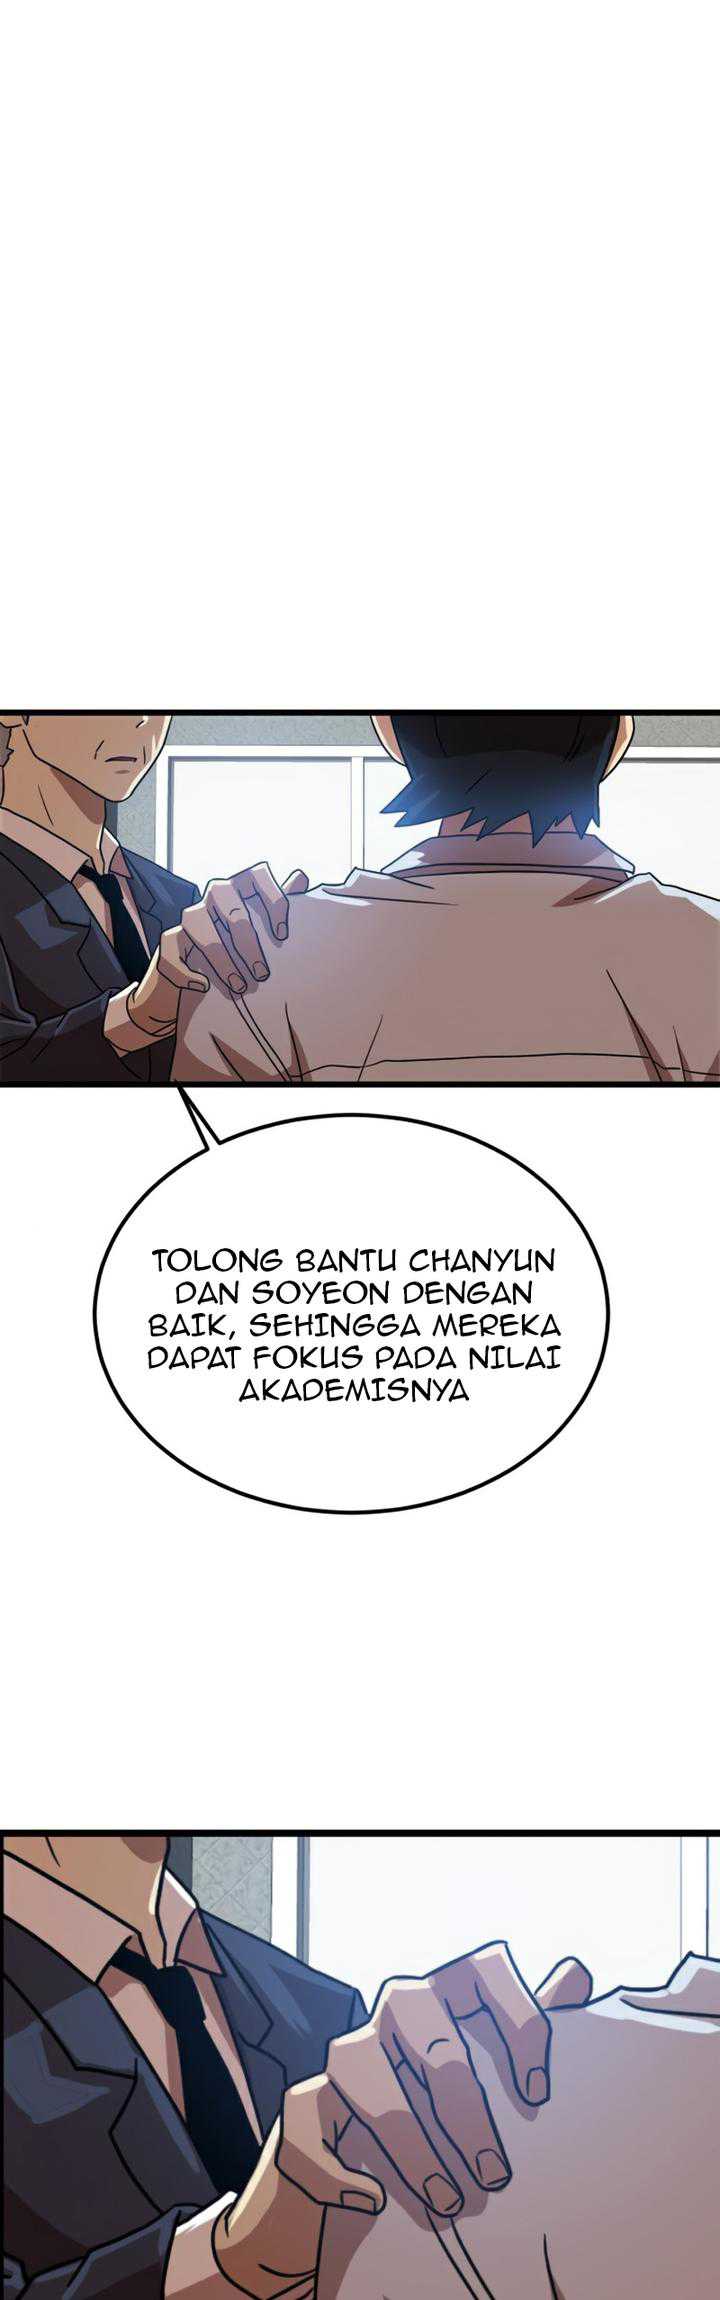 Double Click Chapter 38